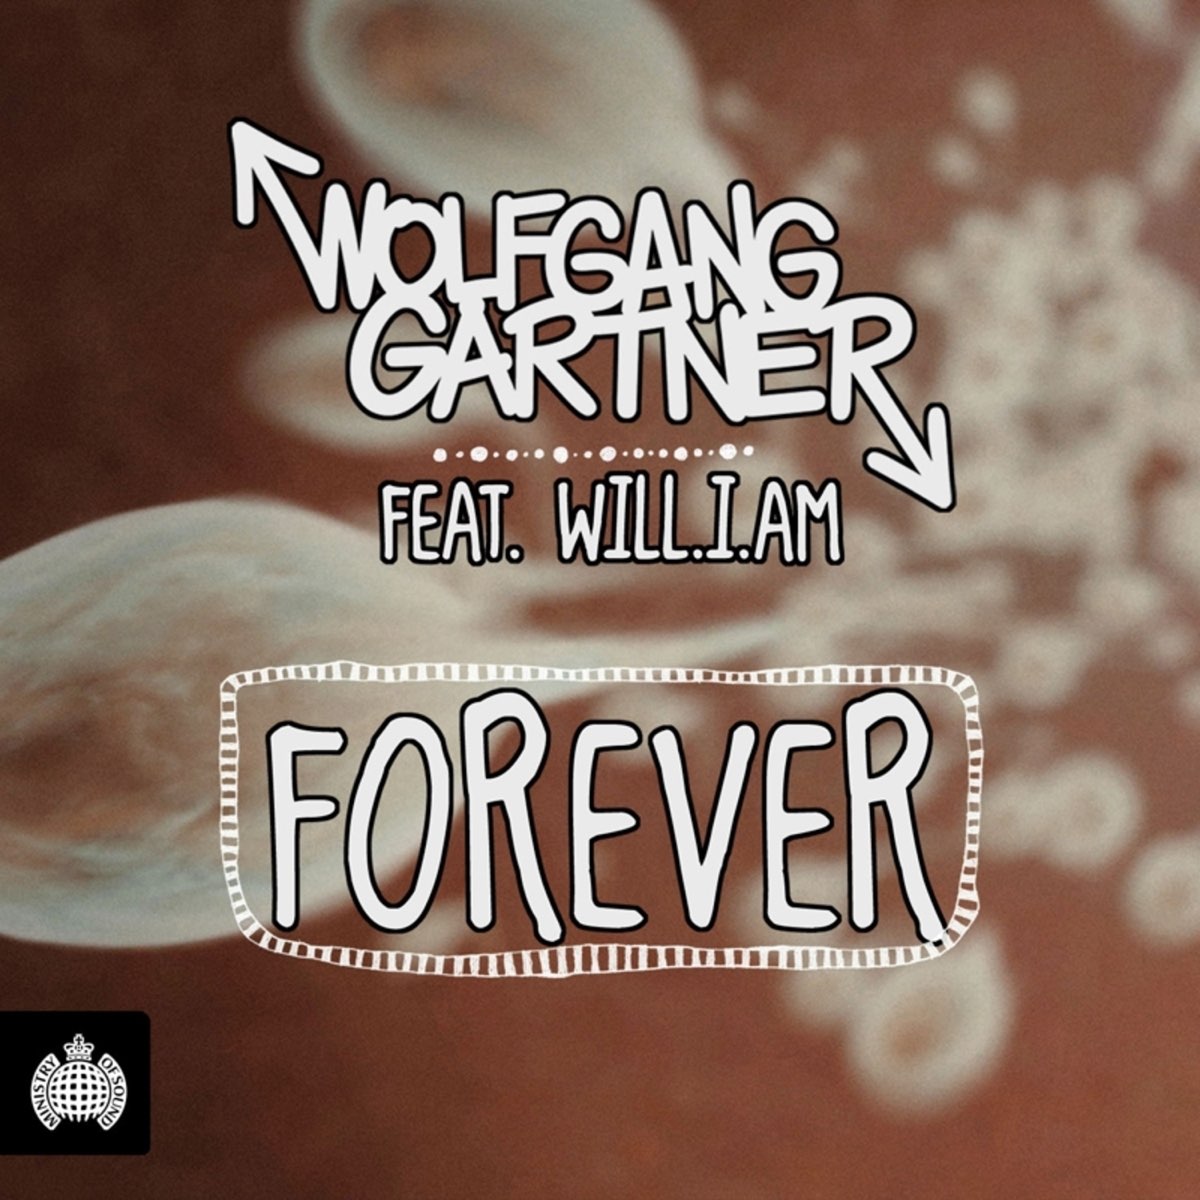 Forever ilytommy перевод на русский. Forever ily Tommy. Tiesto i will be here Wolfgang Gartner Remix. Wolfgang Gartner & Loadstar - Illmerica (RMX). I am what i am Remixes.